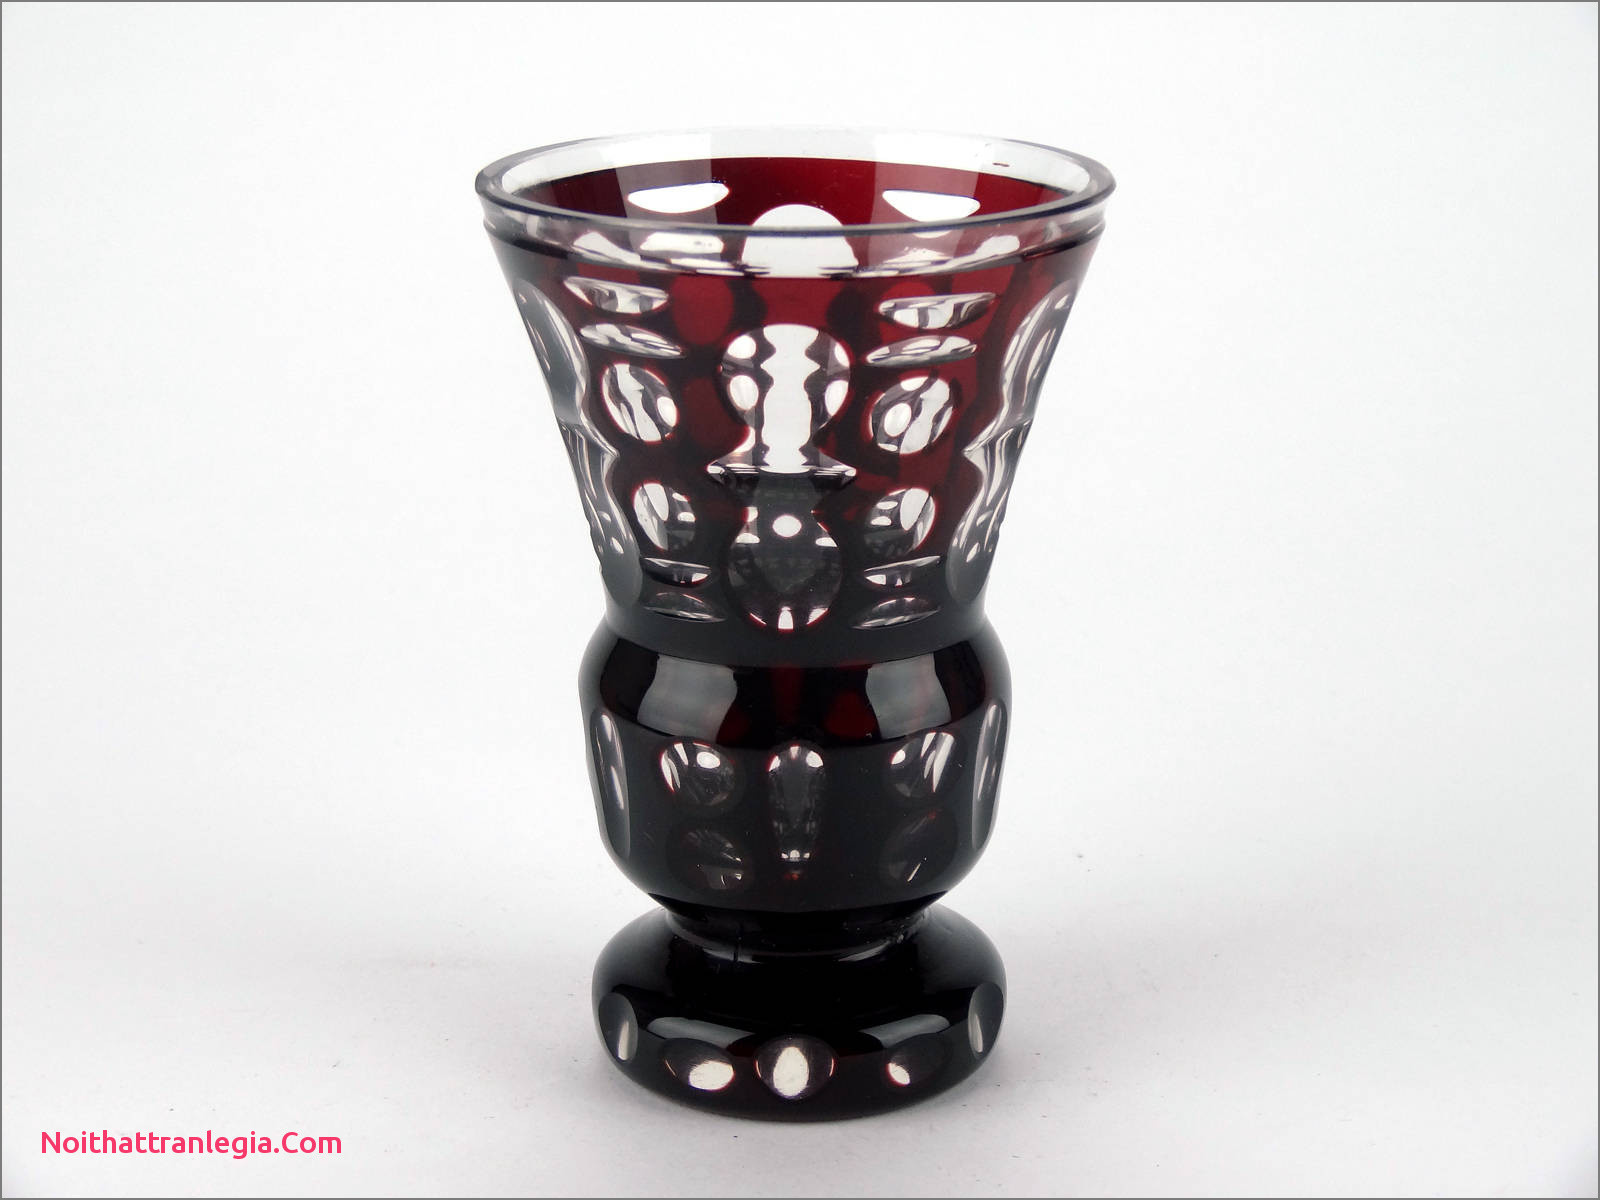 19 Fashionable Antique Waterford Crystal Vases 2024 free download antique waterford crystal vases of 20 cut glass antique vase noithattranlegia vases design throughout antique c1910 bohemian cut to clear red glass vase czech ruby red cut glass goblet